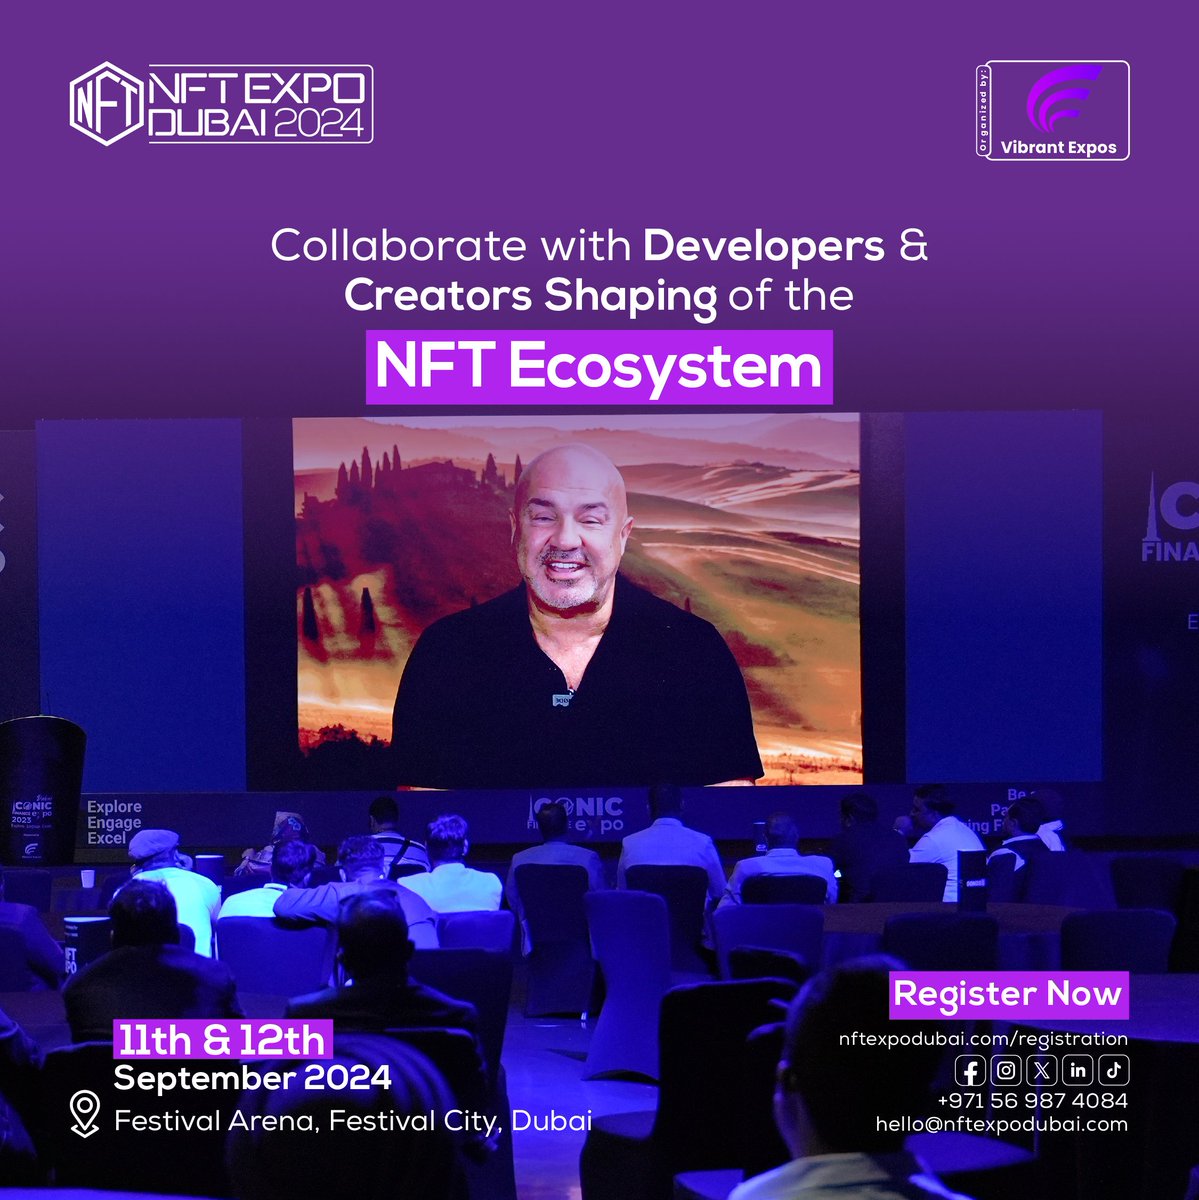 🤝 Collaborate with developers and creators shaping the future of the NFT ecosystem at NFT Expo Dubai 2024. Join us to drive change and innovation together! #NFTExpoDubai #NFTs #TechCollaboration 🚀💻🎨